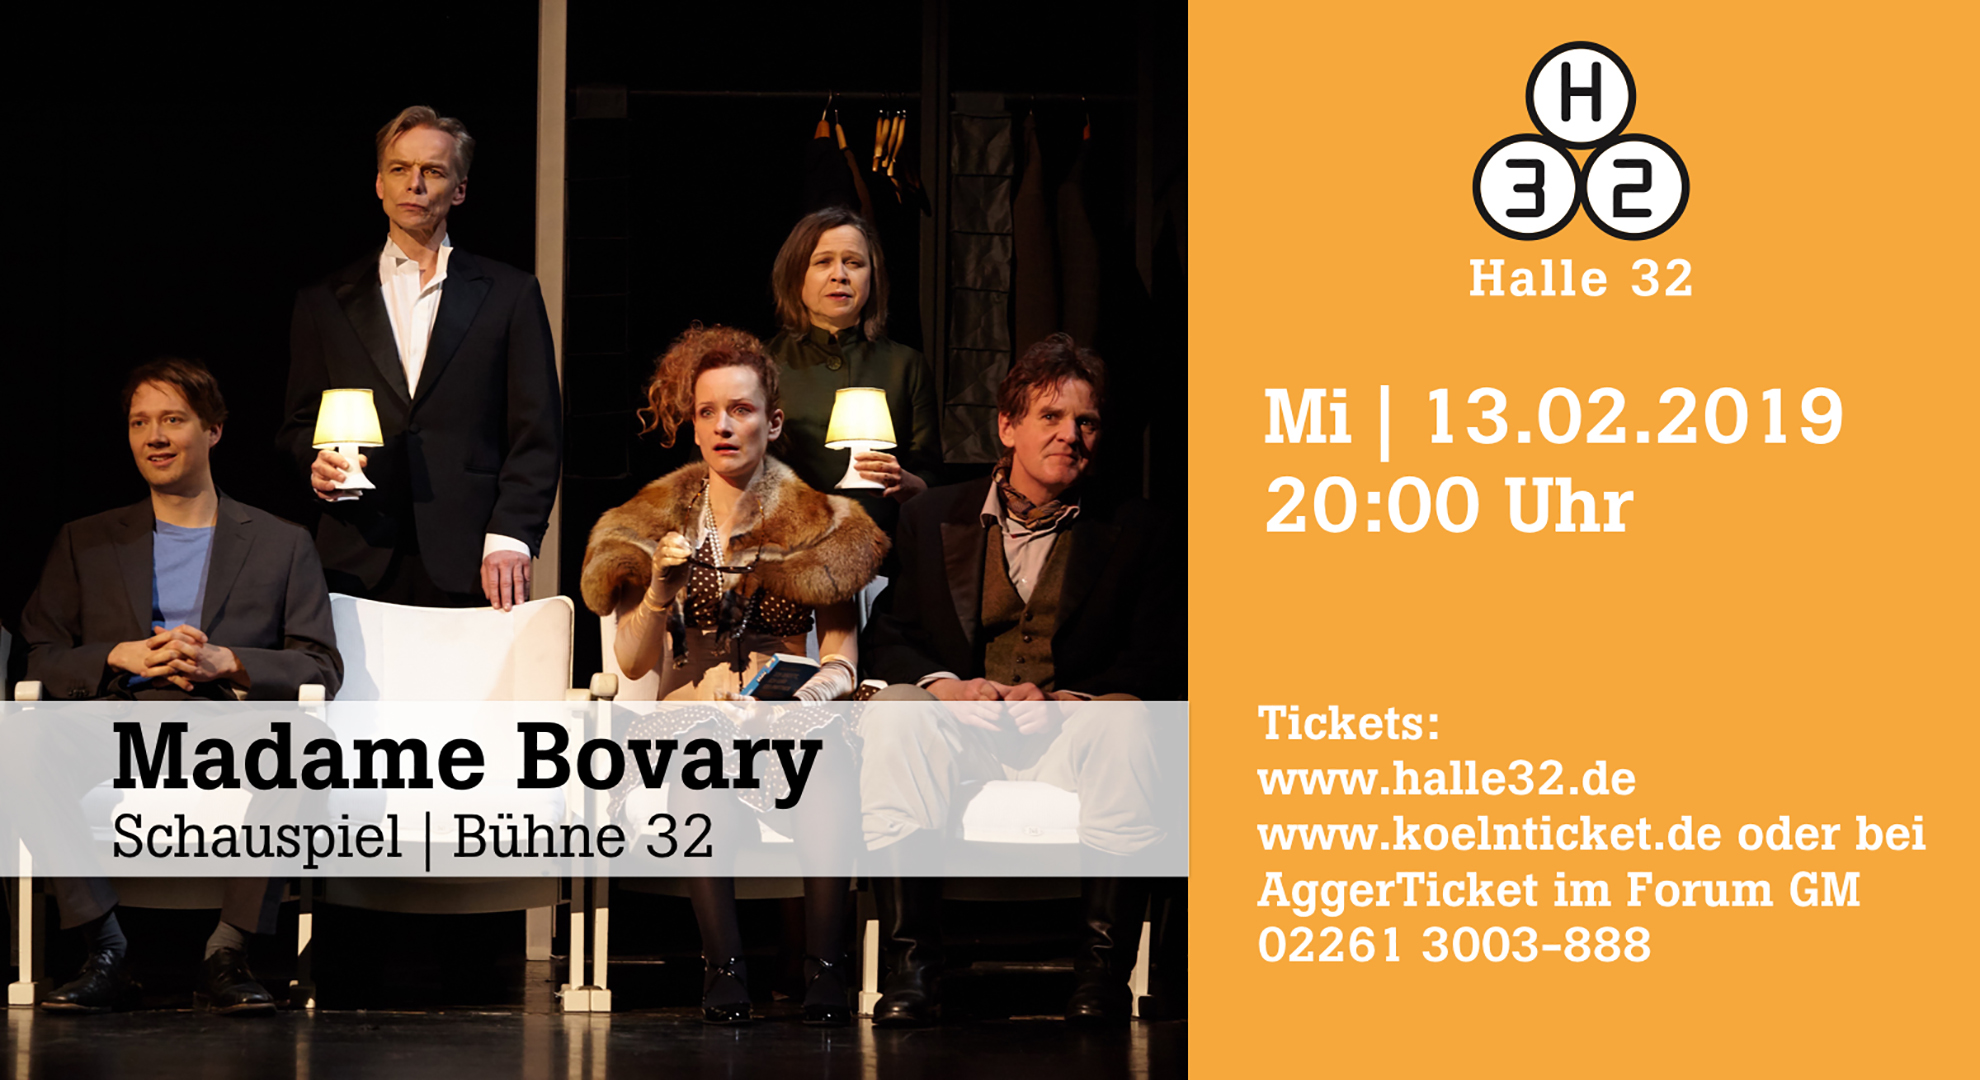 Halle 32 | Madame Bovary